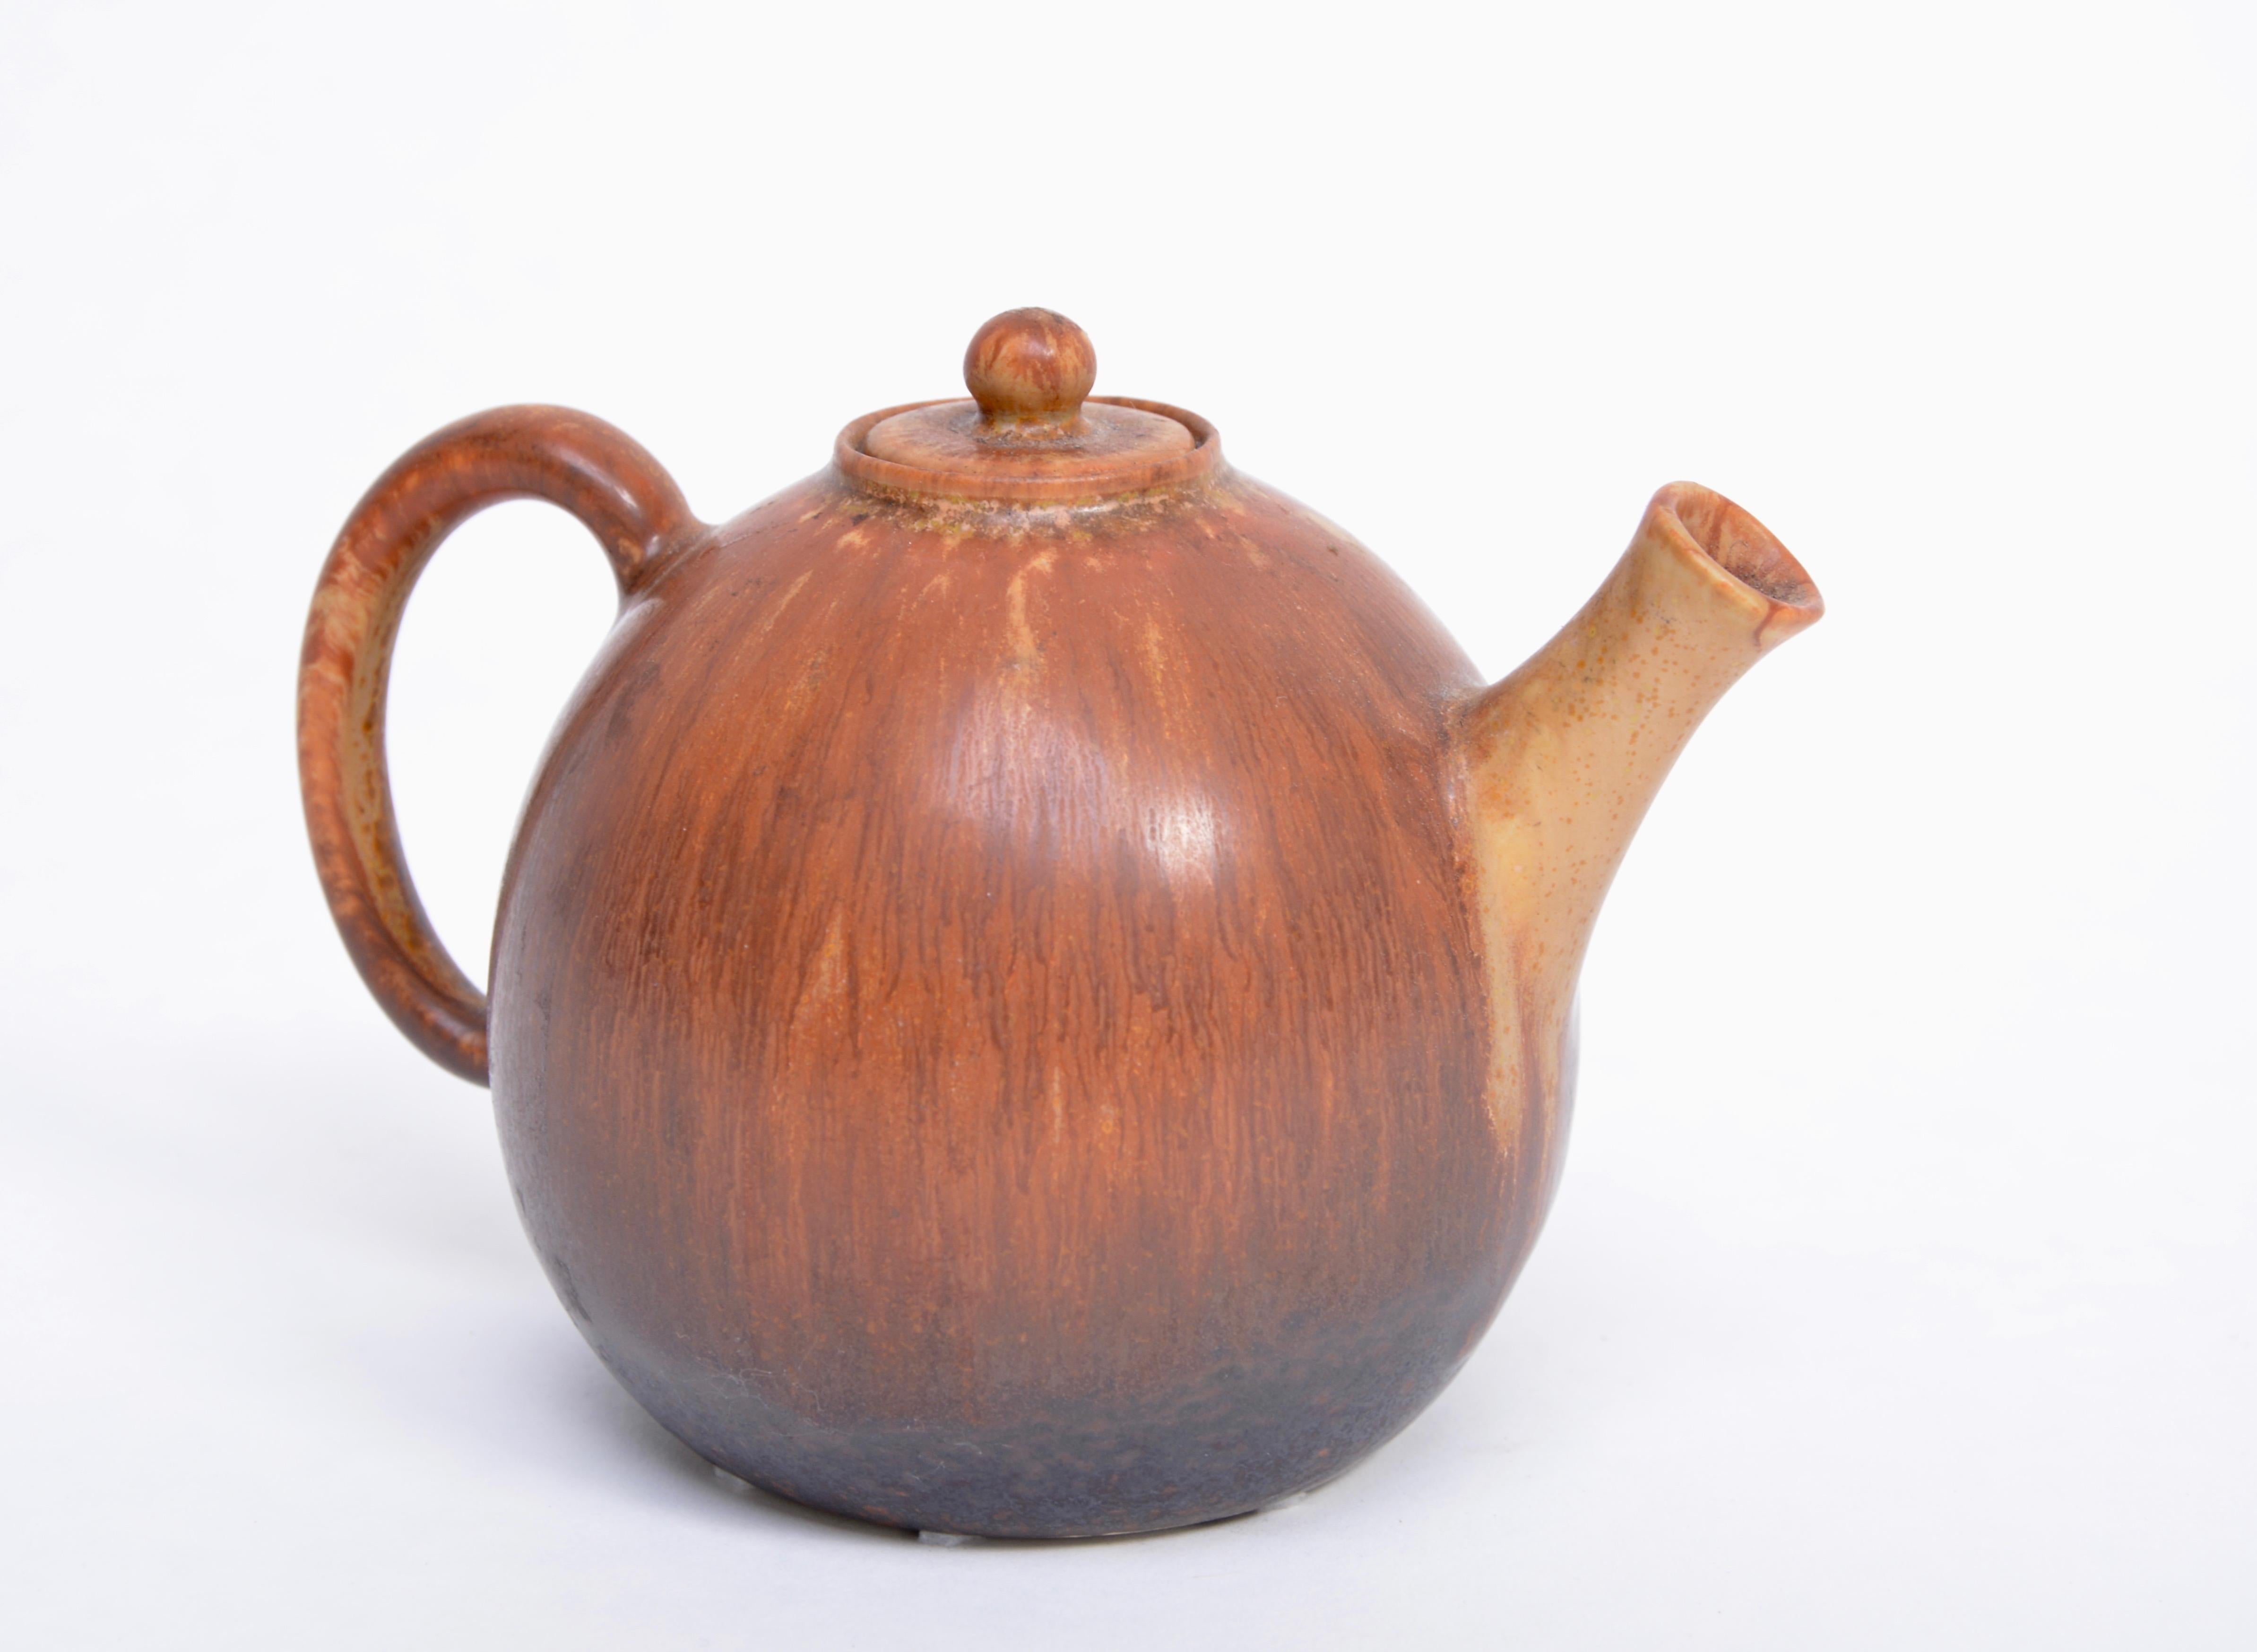 Brown Mid-Century Modern Ceramic tea pot by Carl Harry Stalhane for Rörstrand

This tea pot was designed in the 1960s by Carl Harry Stalhane and manufactured in Sweden for Rörstrand. It is made from ceramic and remains in a very good vintage